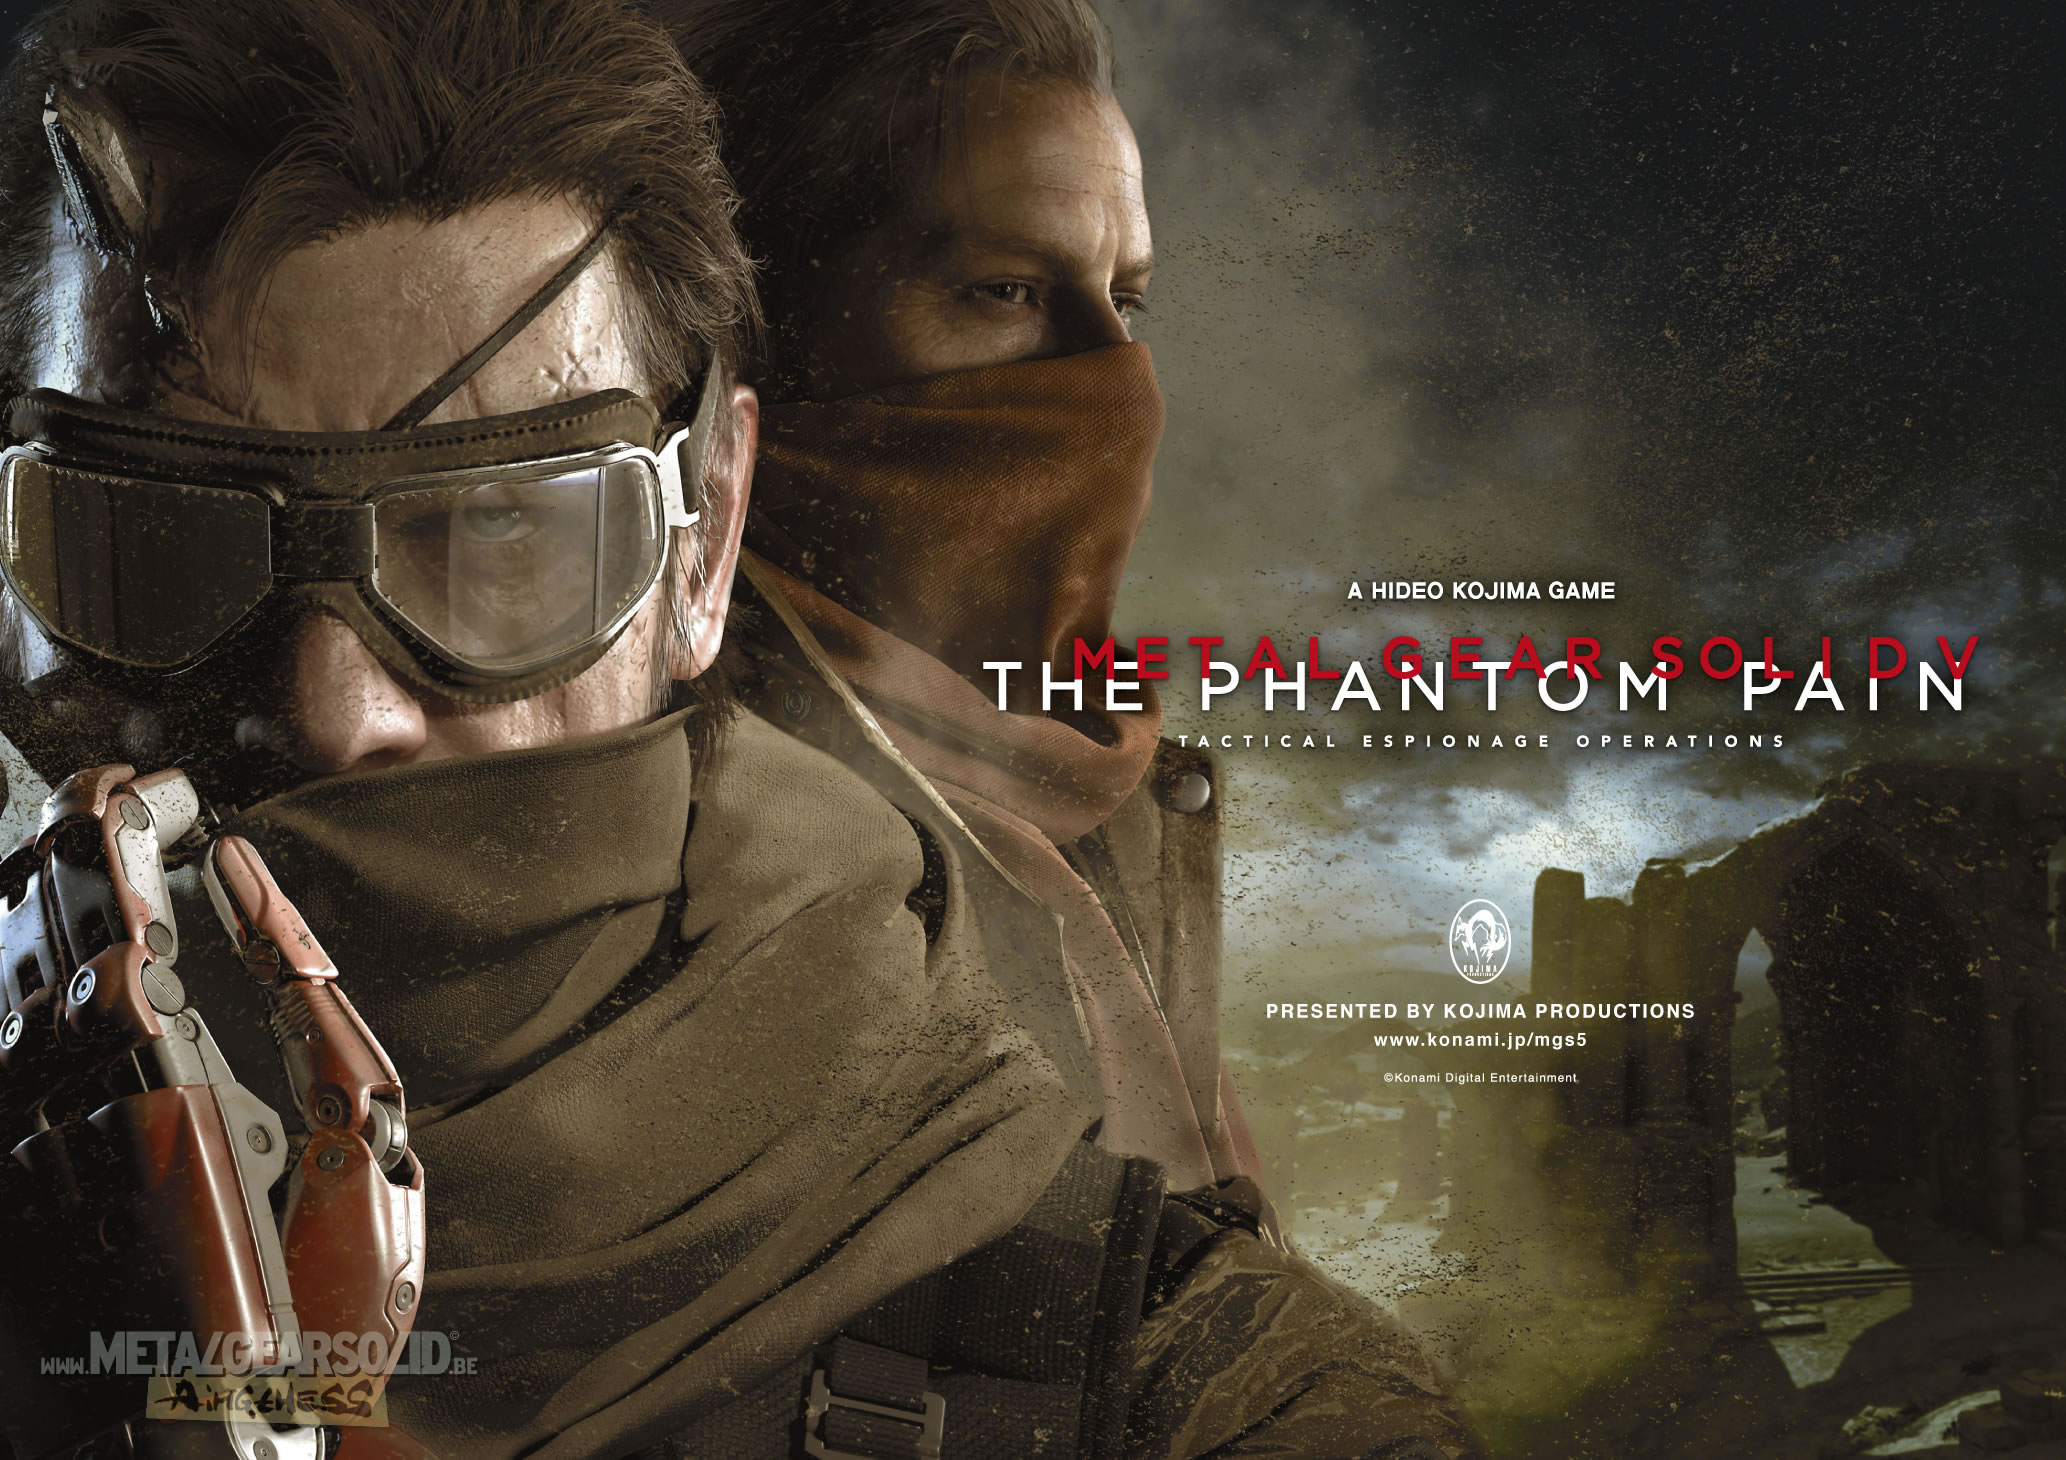 Metal Gear Solid V: The Phantom Pain Will Launch On PC At Same Time As Consoles